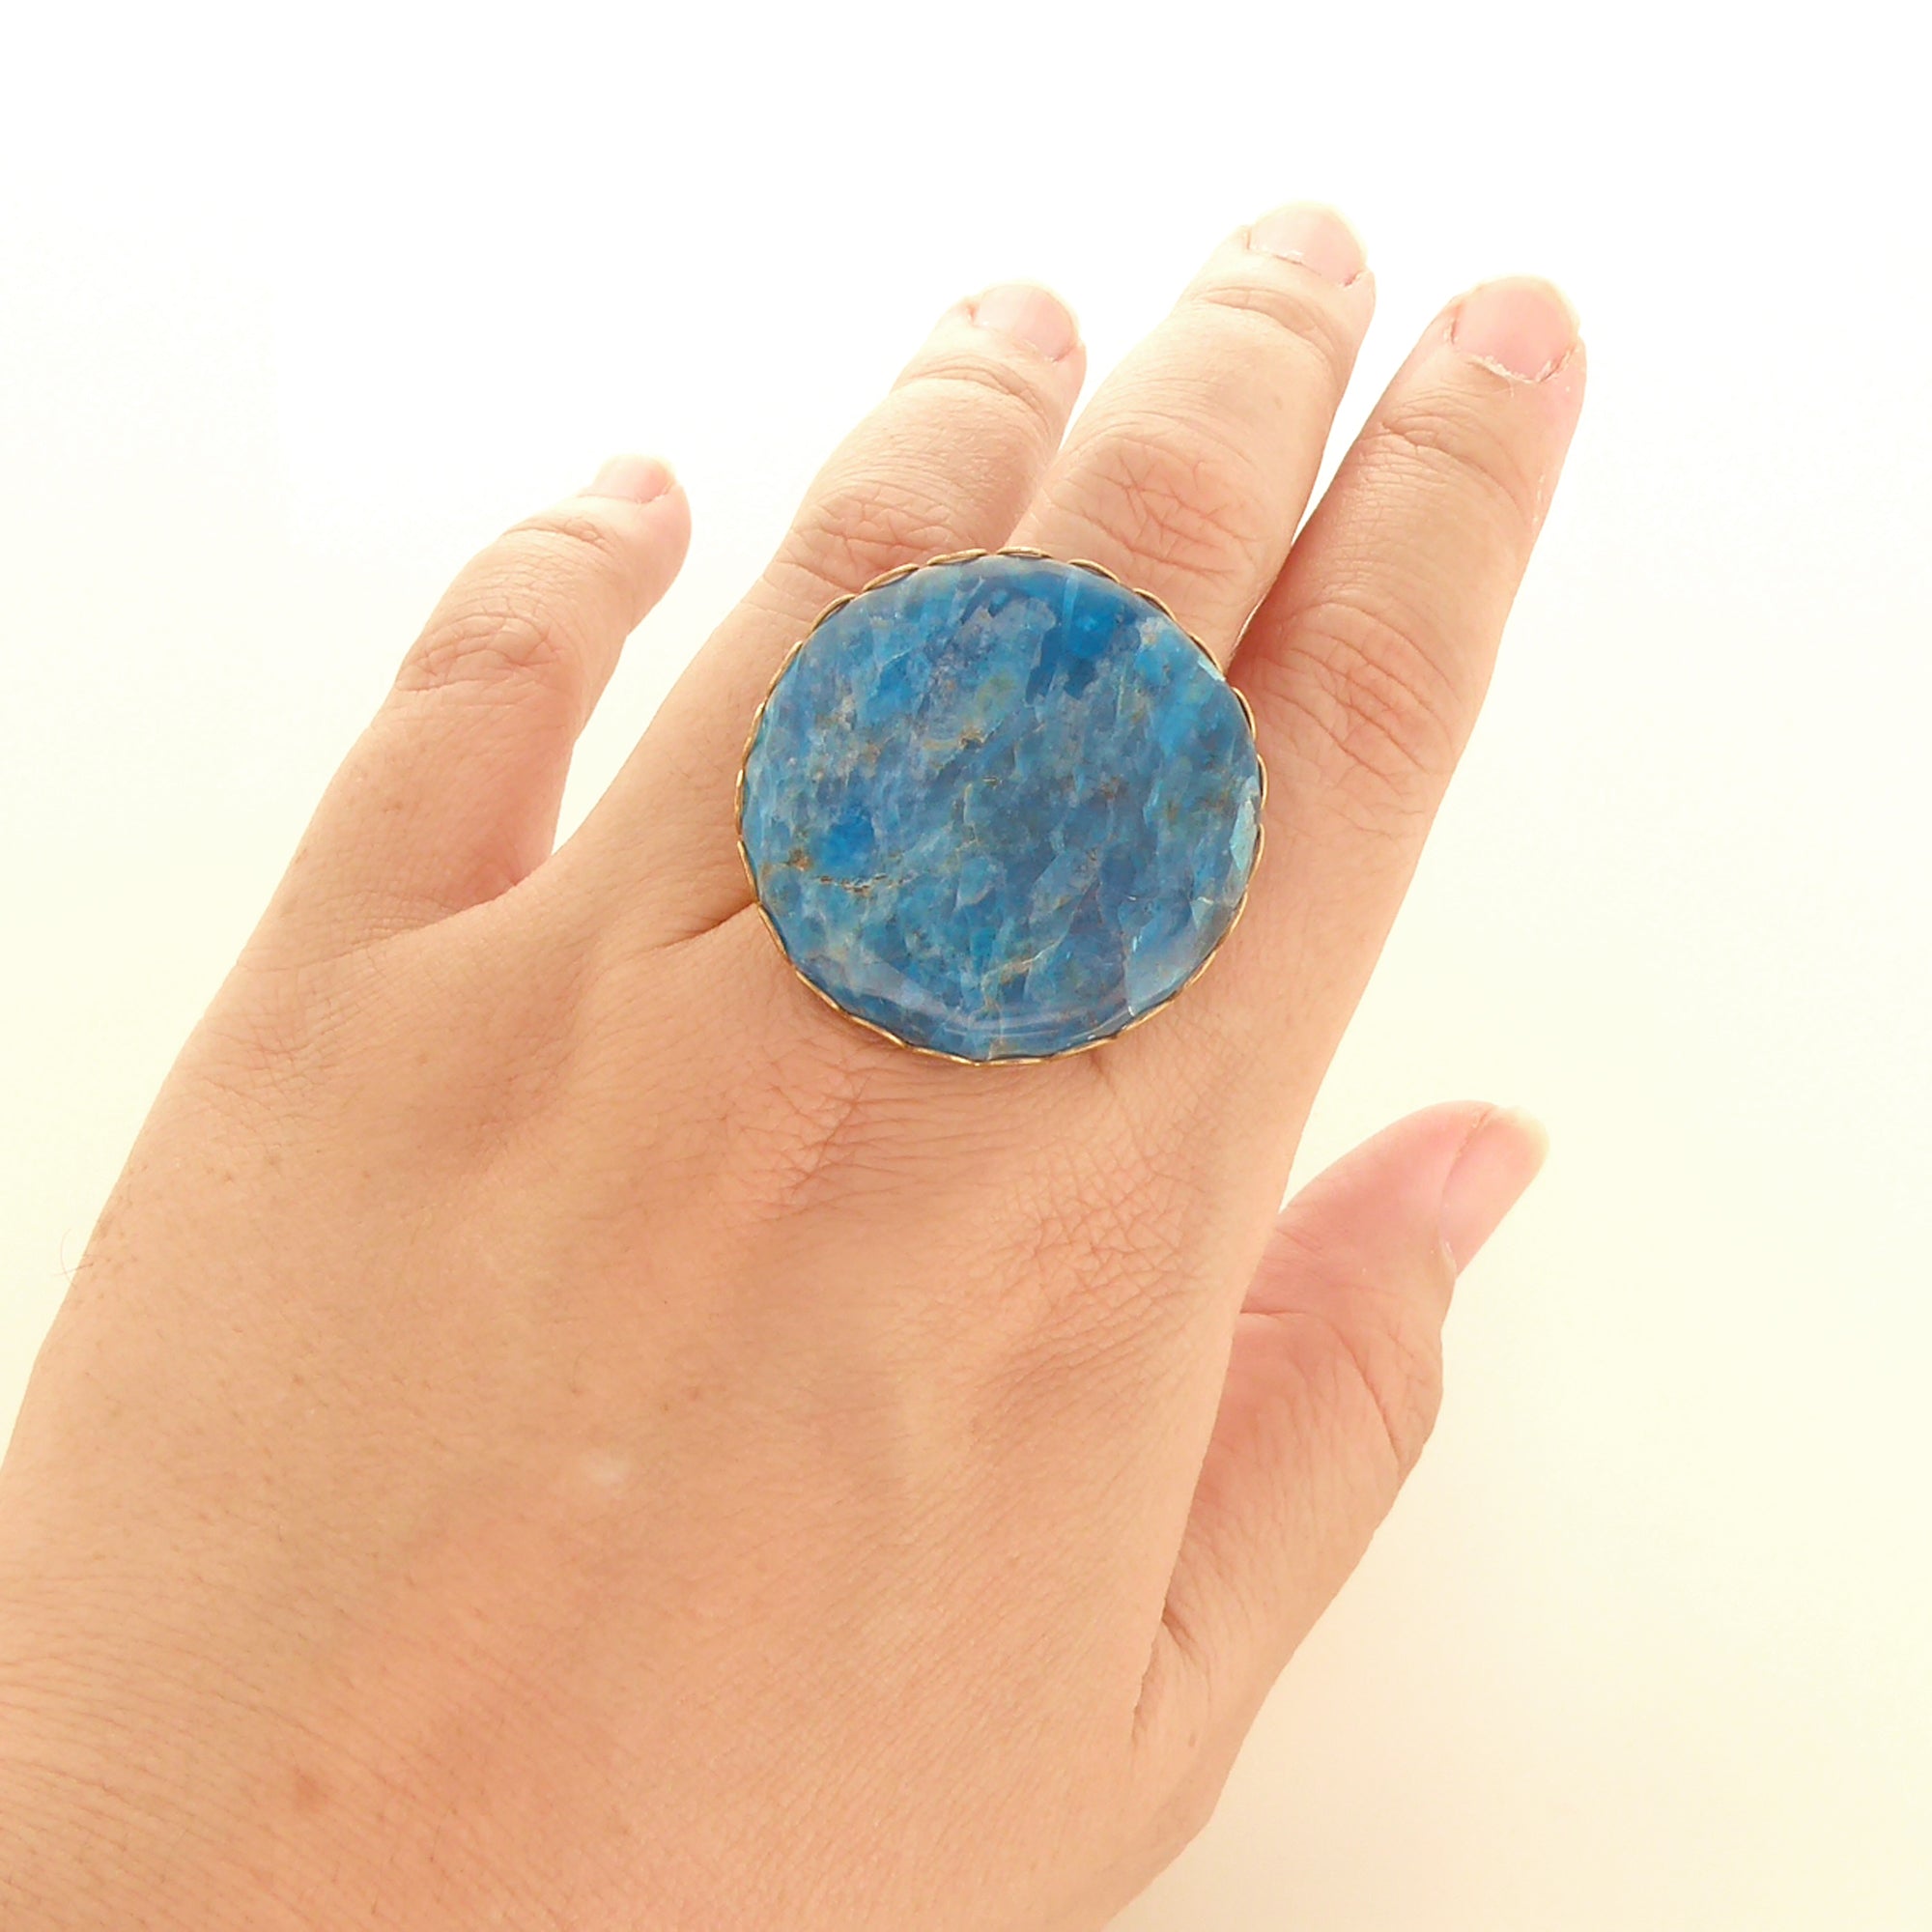 Blue apatite stone ring by Jenny Dayco 5